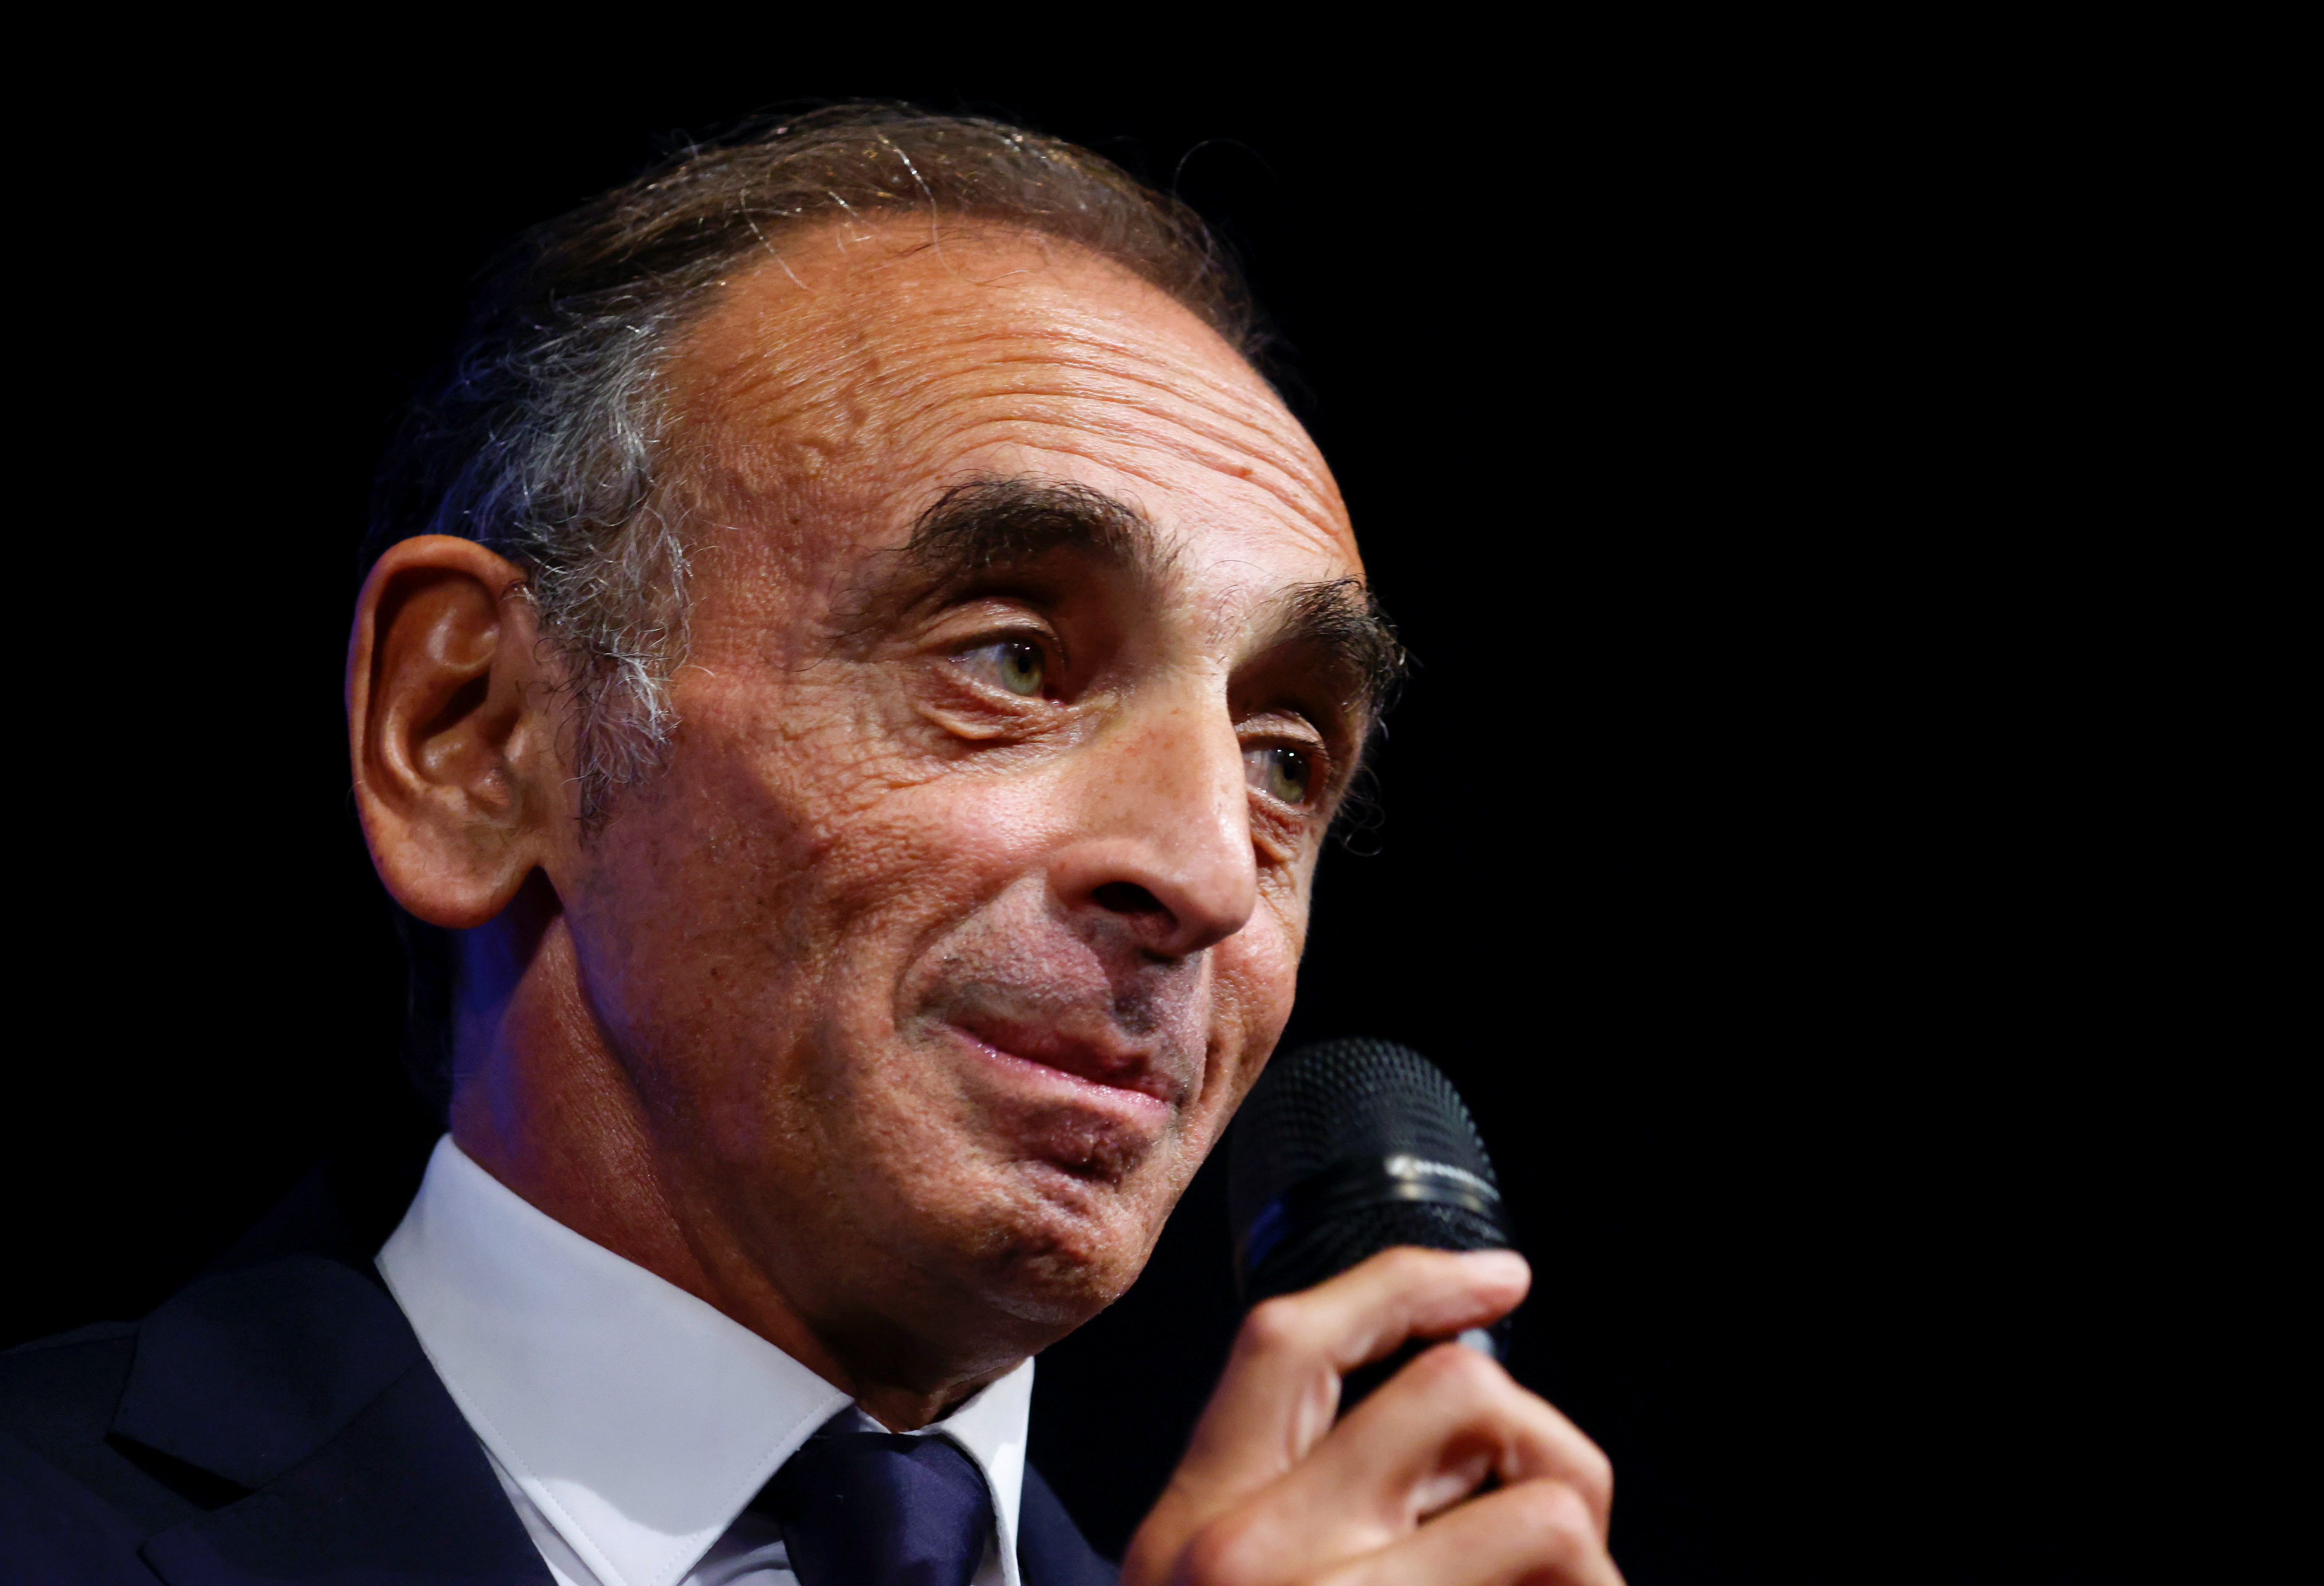 Far-right French commentator Eric Zemmour launches a book before likely presidential run